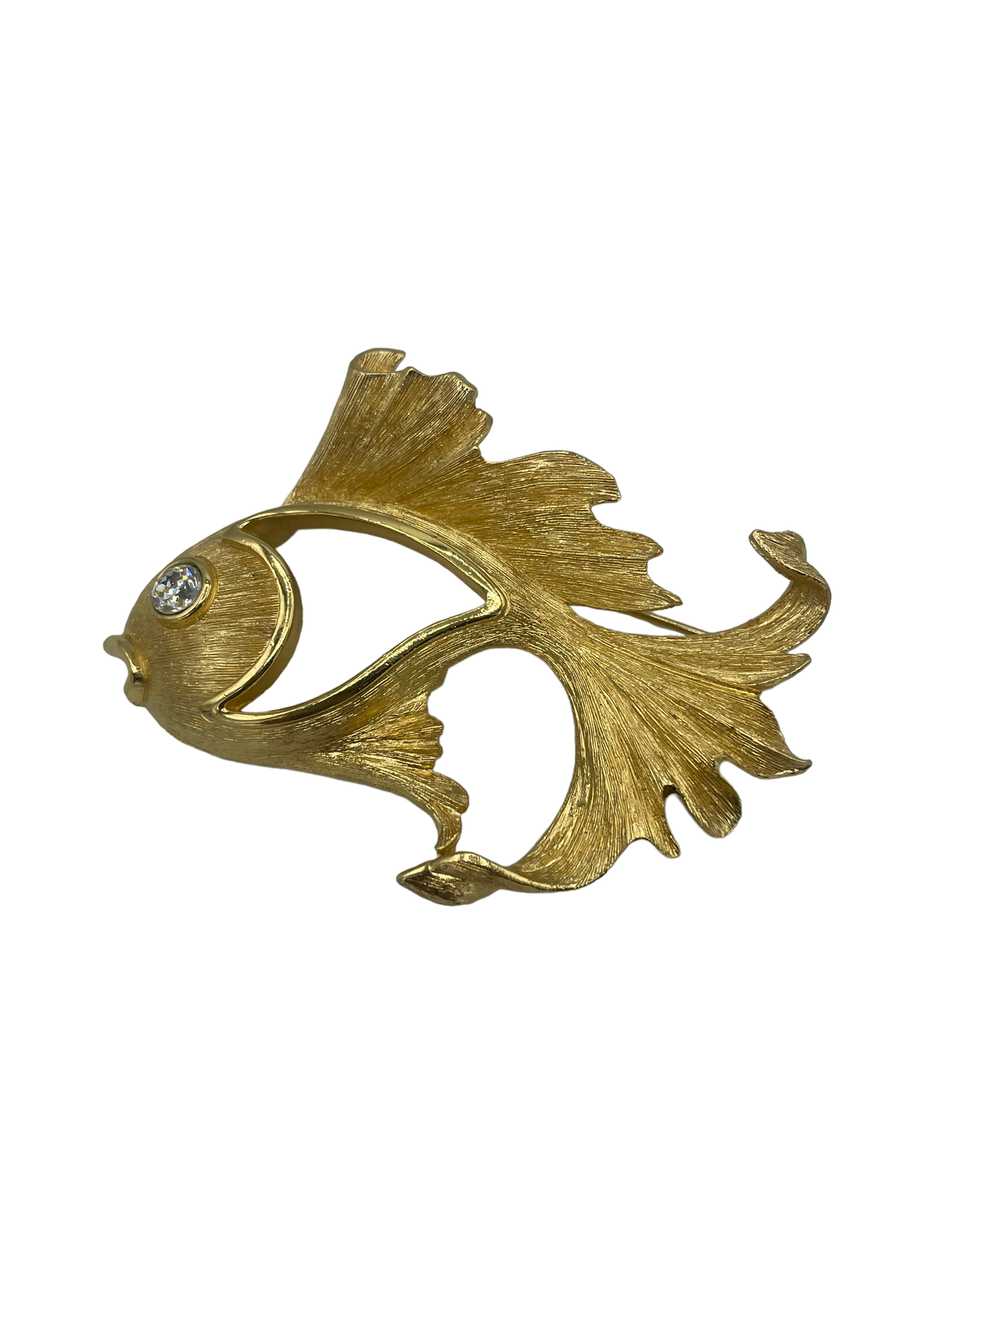 Christian Dior 80s Whimsical Goldfish Brooch - image 1